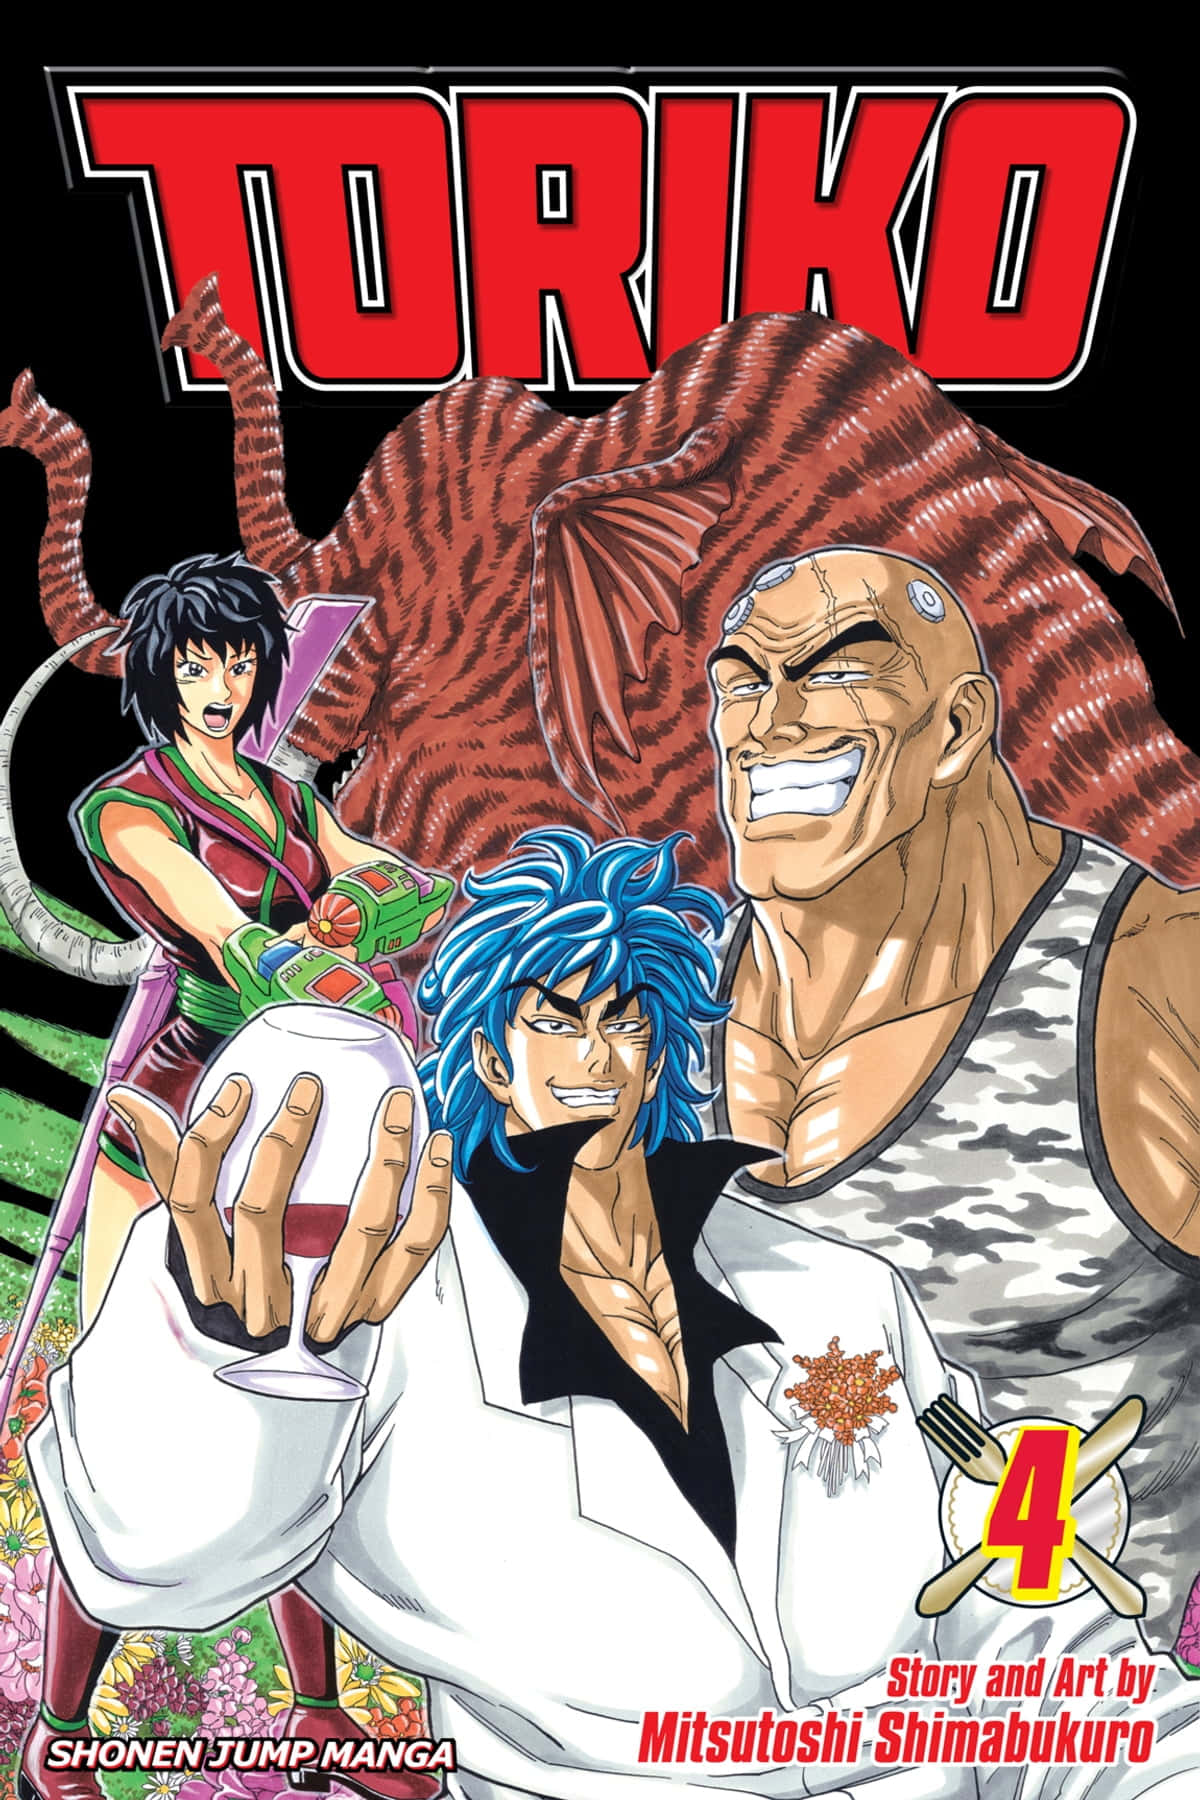 Discover Delicious Ingredient Hunting with Toriko!" Wallpaper